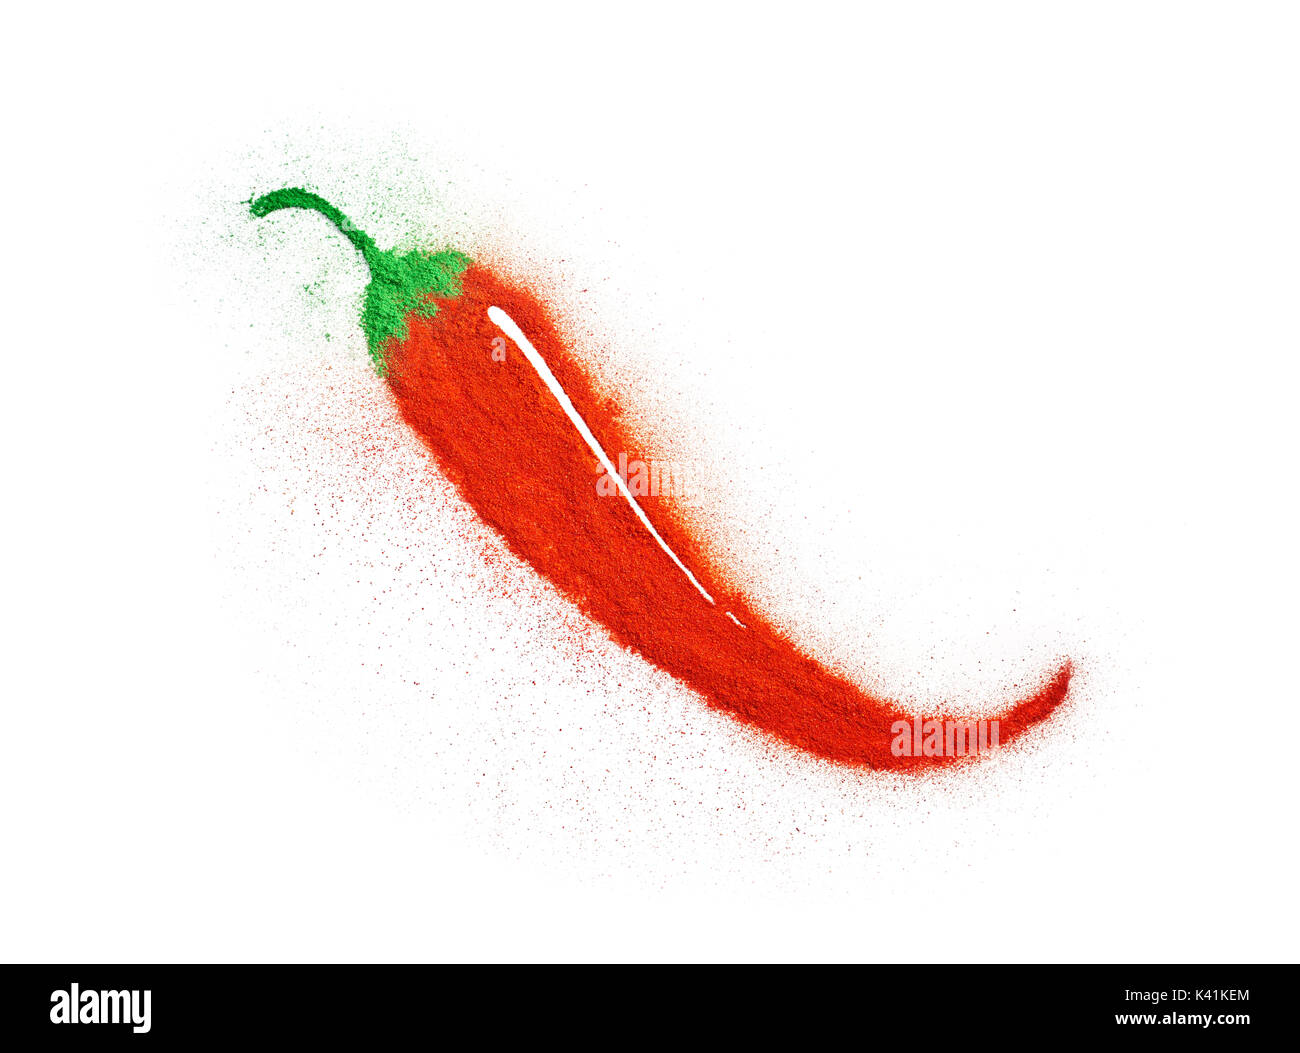 Red and green powder forming a chili pepper shape isolated on white Stock Photo